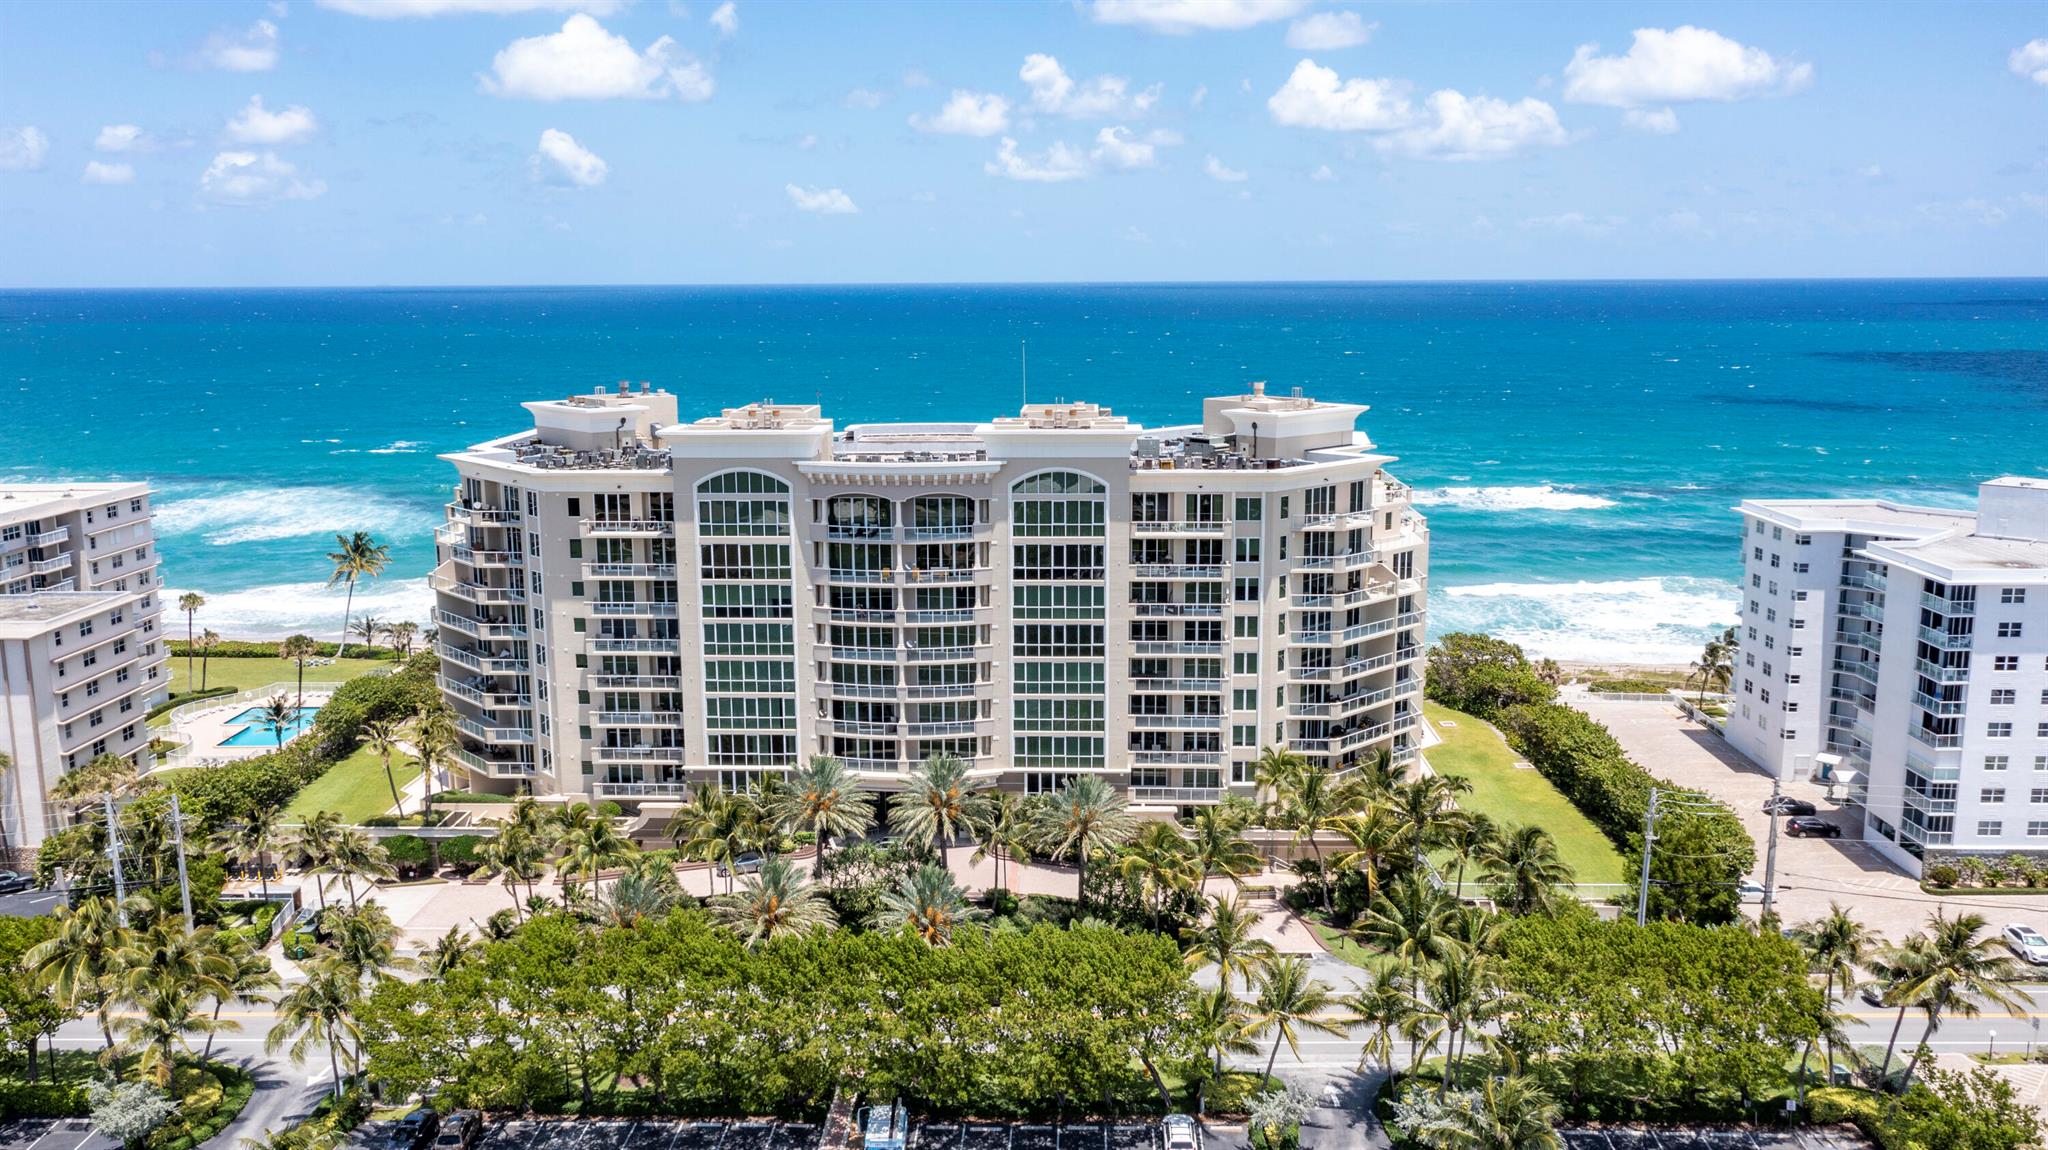 SPECTACULAR DIRECT OCEANFRONT RESIDENCE AT OCEAN GRANDE ON FAMED HILLSBORO MILE. OCEAN TO INTRACOASTAL VIEWS FROM 2 LARGE BALCONIES, HIGH CEILINGS, MARBLE FLOORS, CUSTOM BUILT INS AND FINE DETAILS THROUGHOUT. PRIVATE ELEVATOR ENTERS DIRECTLY INTO UNIT. LARGE OCEANFRONT LIVING ROOM WITH CUSTOM BUILT INS AND ABUNDANT NATURAL LIGHT WITH FLOOR TO CEILING IMPACT GLASS DOORS  THAT OPEN OUT TO LARGE OCEANFRONT BALCONY. GOURMET KITCHEN WITH GRANITE COUNTERS AND ABUNDANT STORAGE. SPACIOUS MASTER SUITE WITH LARGE WALK IN CLOSET, MARBLE BATH AND IMPACT GLASS DOORS TO INTRACOASTAL VIEW BALCONY. ADDITIONAL EN-SUITE GUEST BEDROOM PLUS GUEST POWDER BATH.  OCEAN GRANDE OFFERS EXCELLENT AMENITIES WITH A DOORMAN, VALET, CLUB ROOM, FITNESS CENTER AND FANTASTIC POOL RIGHT ON THE OCEAN. BOAT DOCKAGE AVAILABLE